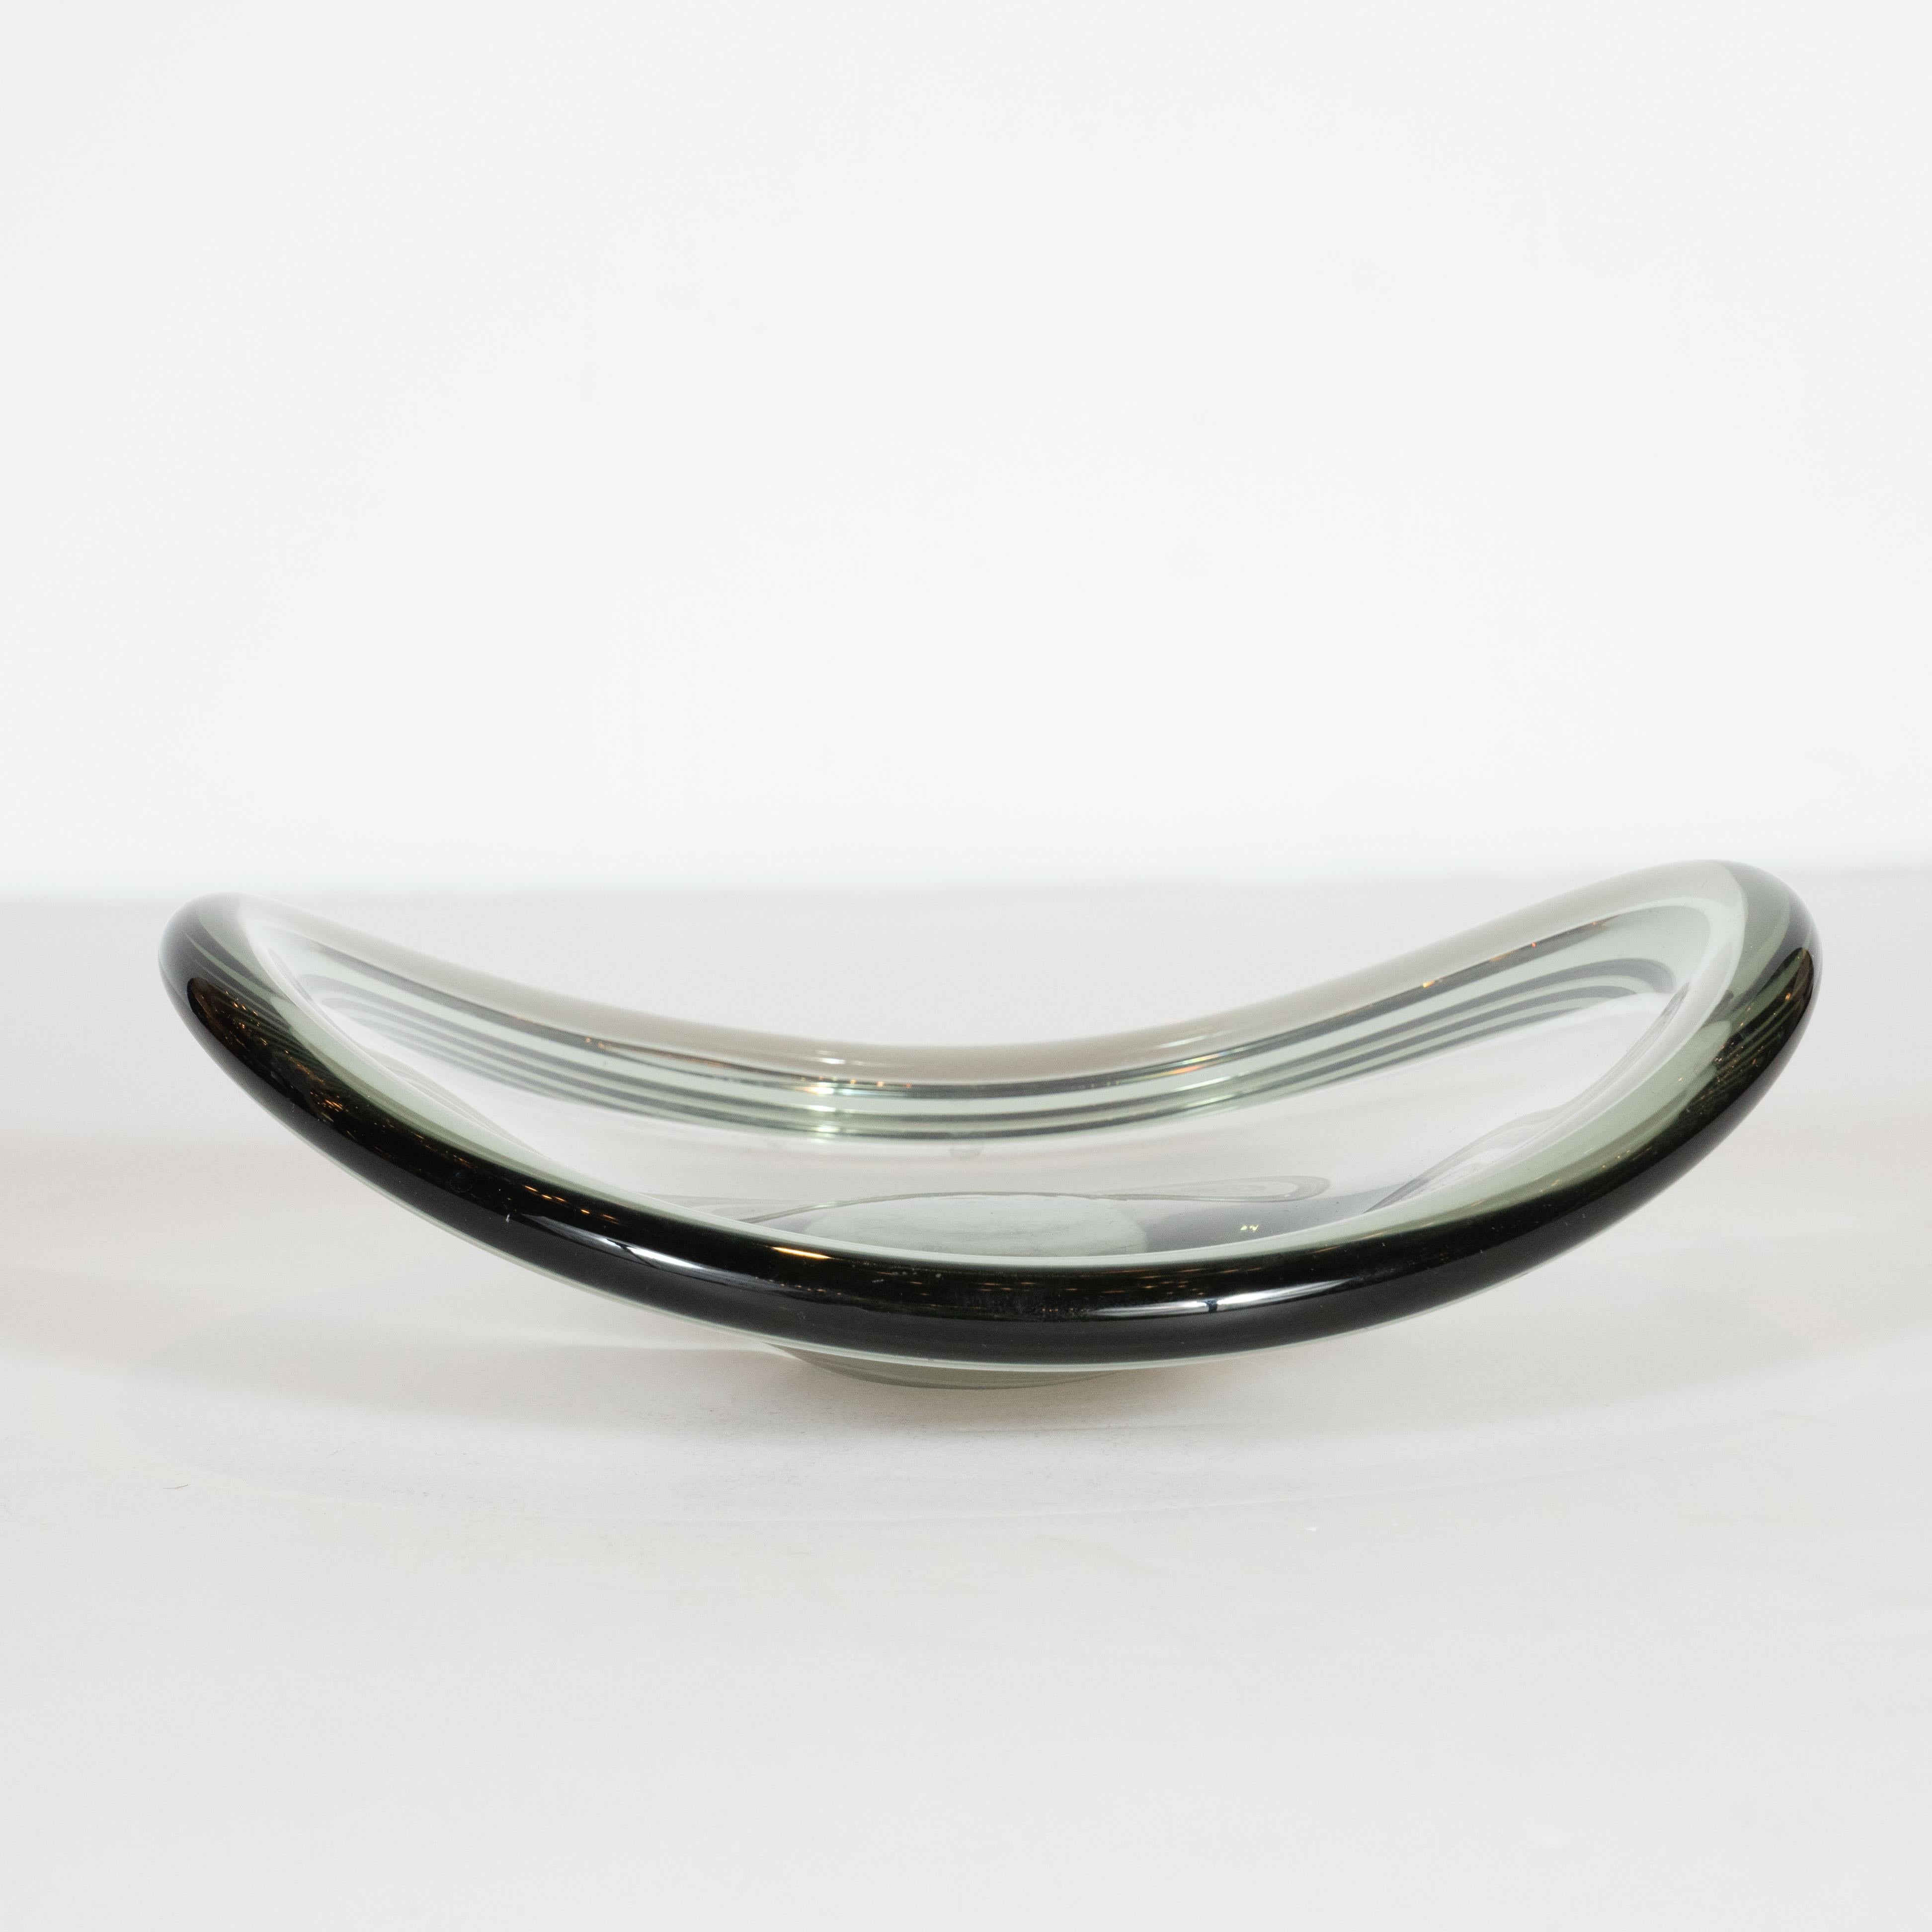 This elegant Mid-Century Modern bowl was hand blown by the celebrated Swedish maker Holmgaard in 1952. It features a sculptural elliptical form with undulating sides and a subtly raised lip all realized in a translucent smoked glass. With its clean